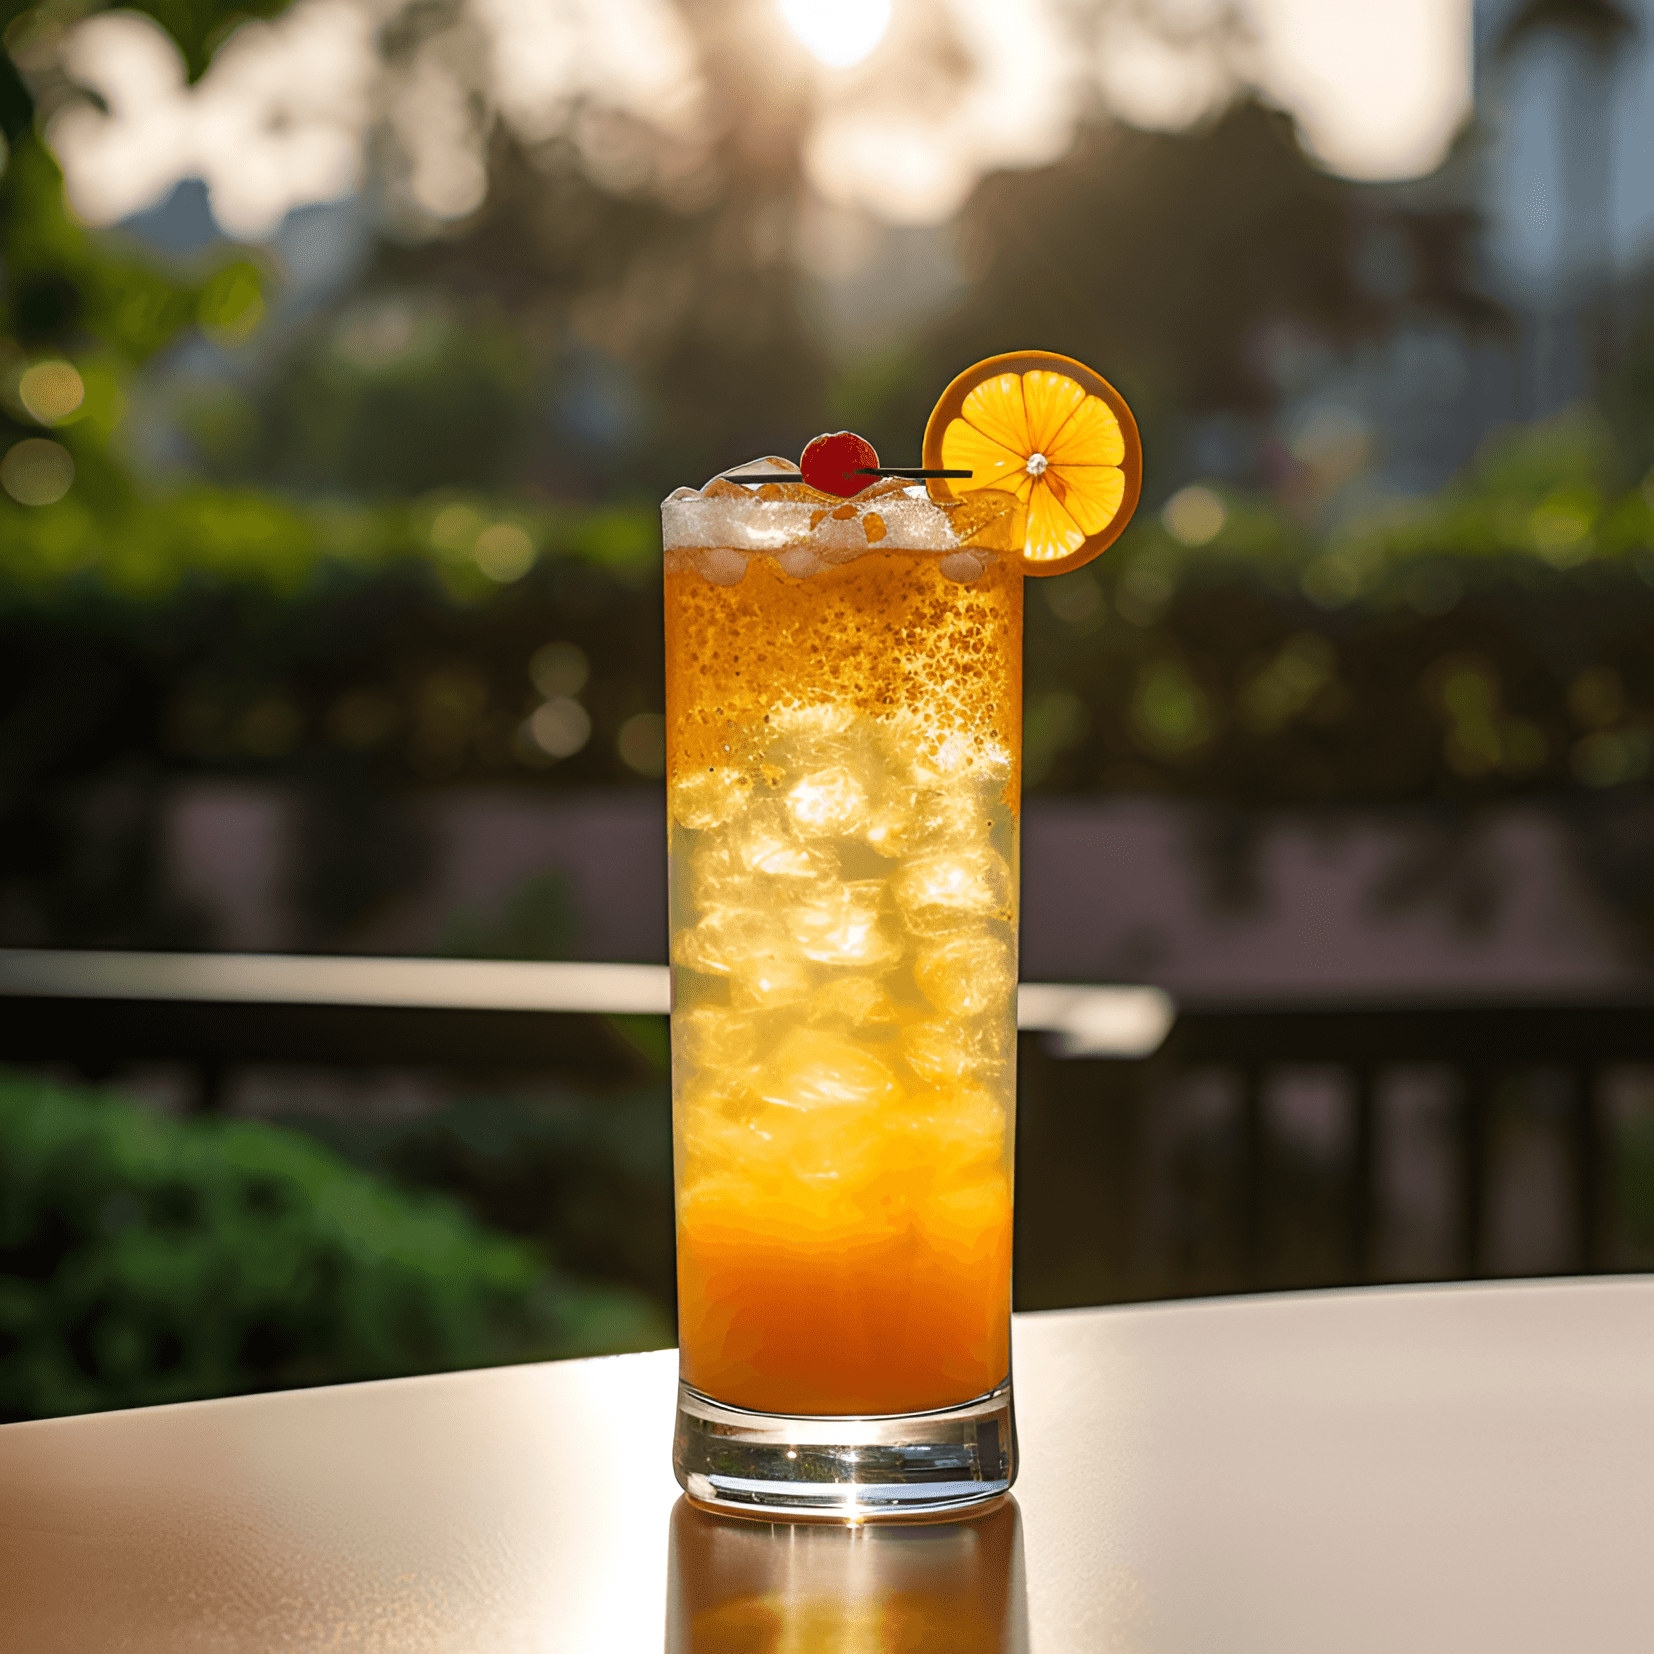 Bocce Ball Cocktail Recipe - The Bocce Ball cocktail is a light, refreshing, and fruity drink with a perfect balance of sweet and tart flavors. The combination of orange juice and amaretto gives it a citrusy sweetness, while the club soda adds a subtle fizz and crispness.